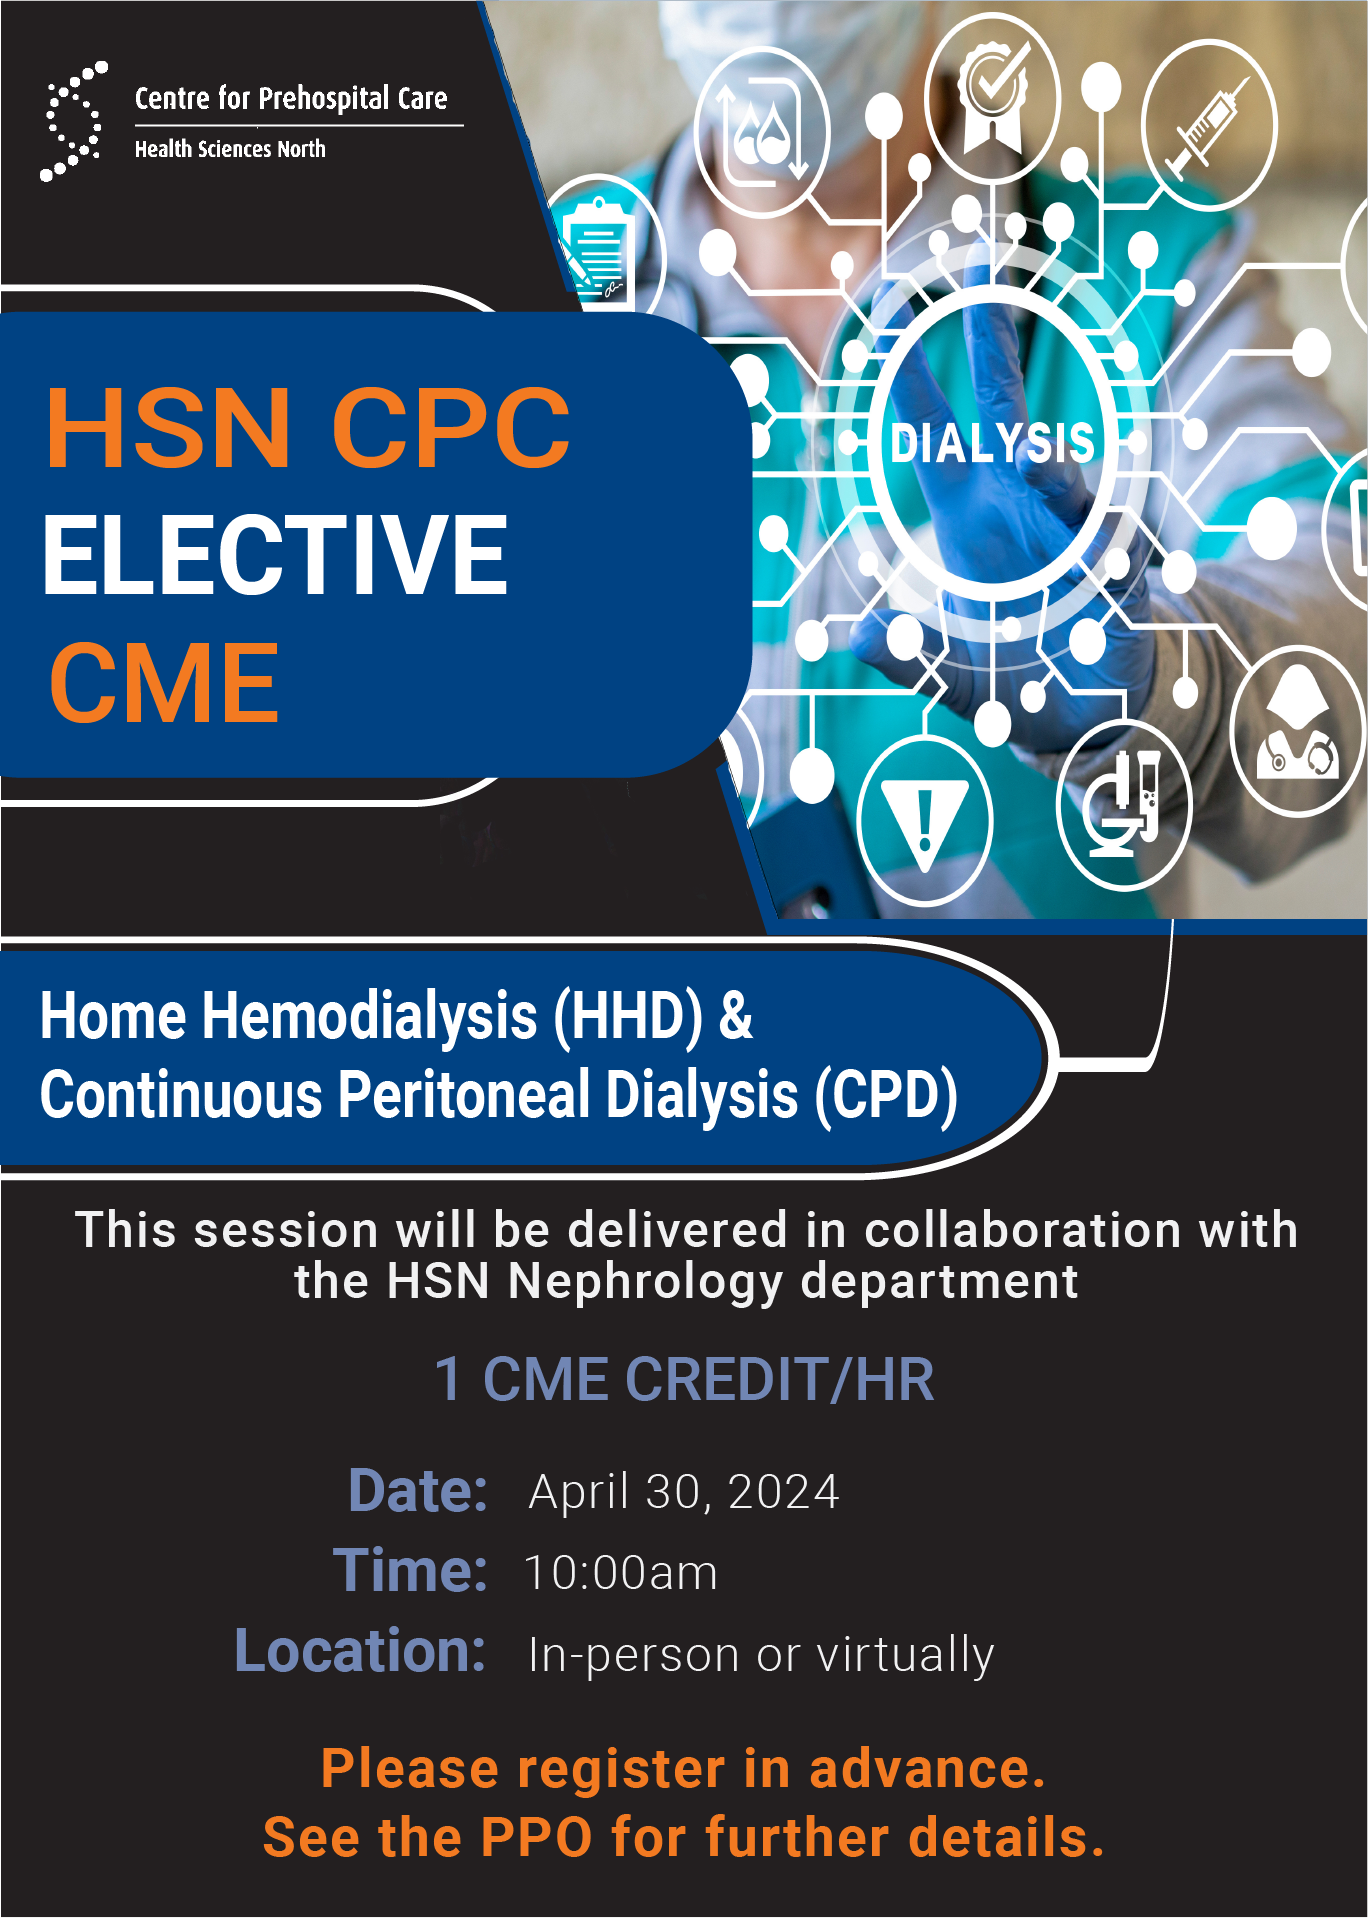 Home Hemodialysis (HHD)_Continuous Peritoneal Dialysis (CPD)